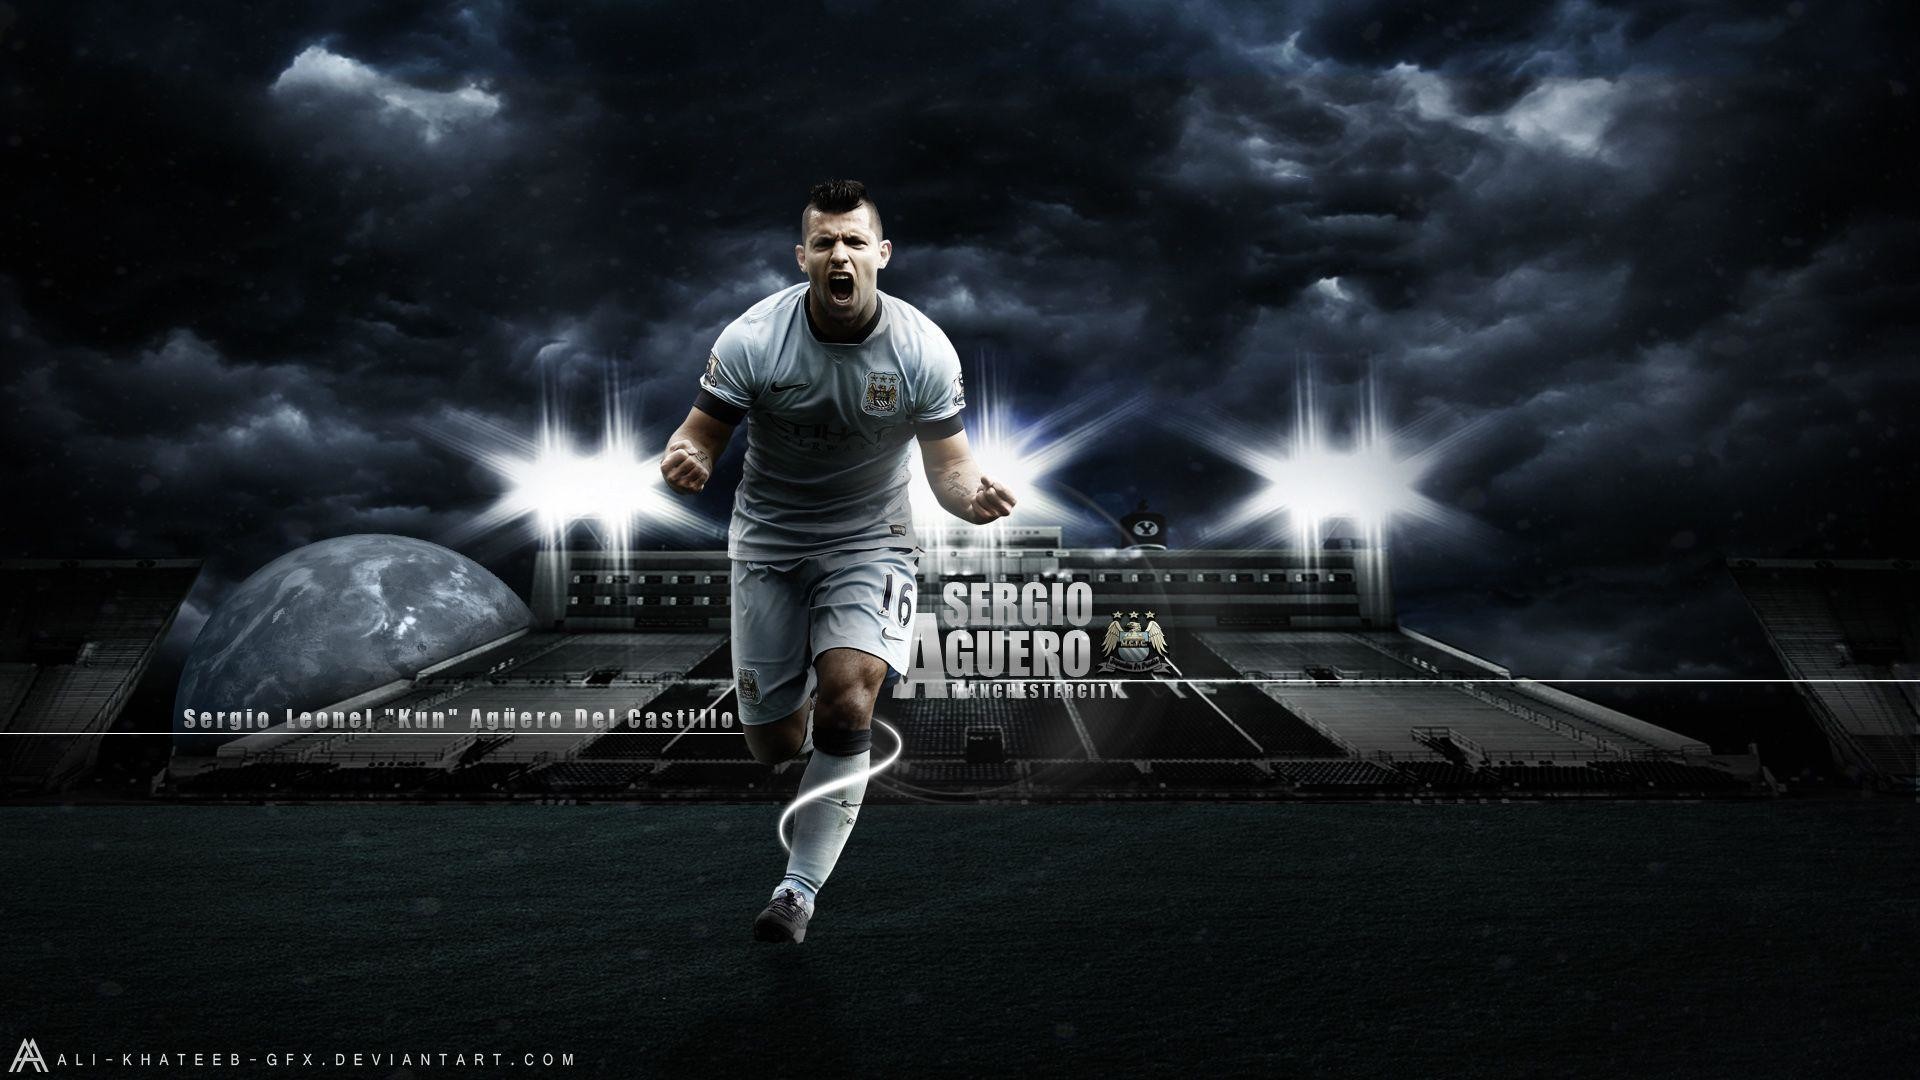 1920x1080 Sergio Aguero Wallpapers High Resolution and Quality .